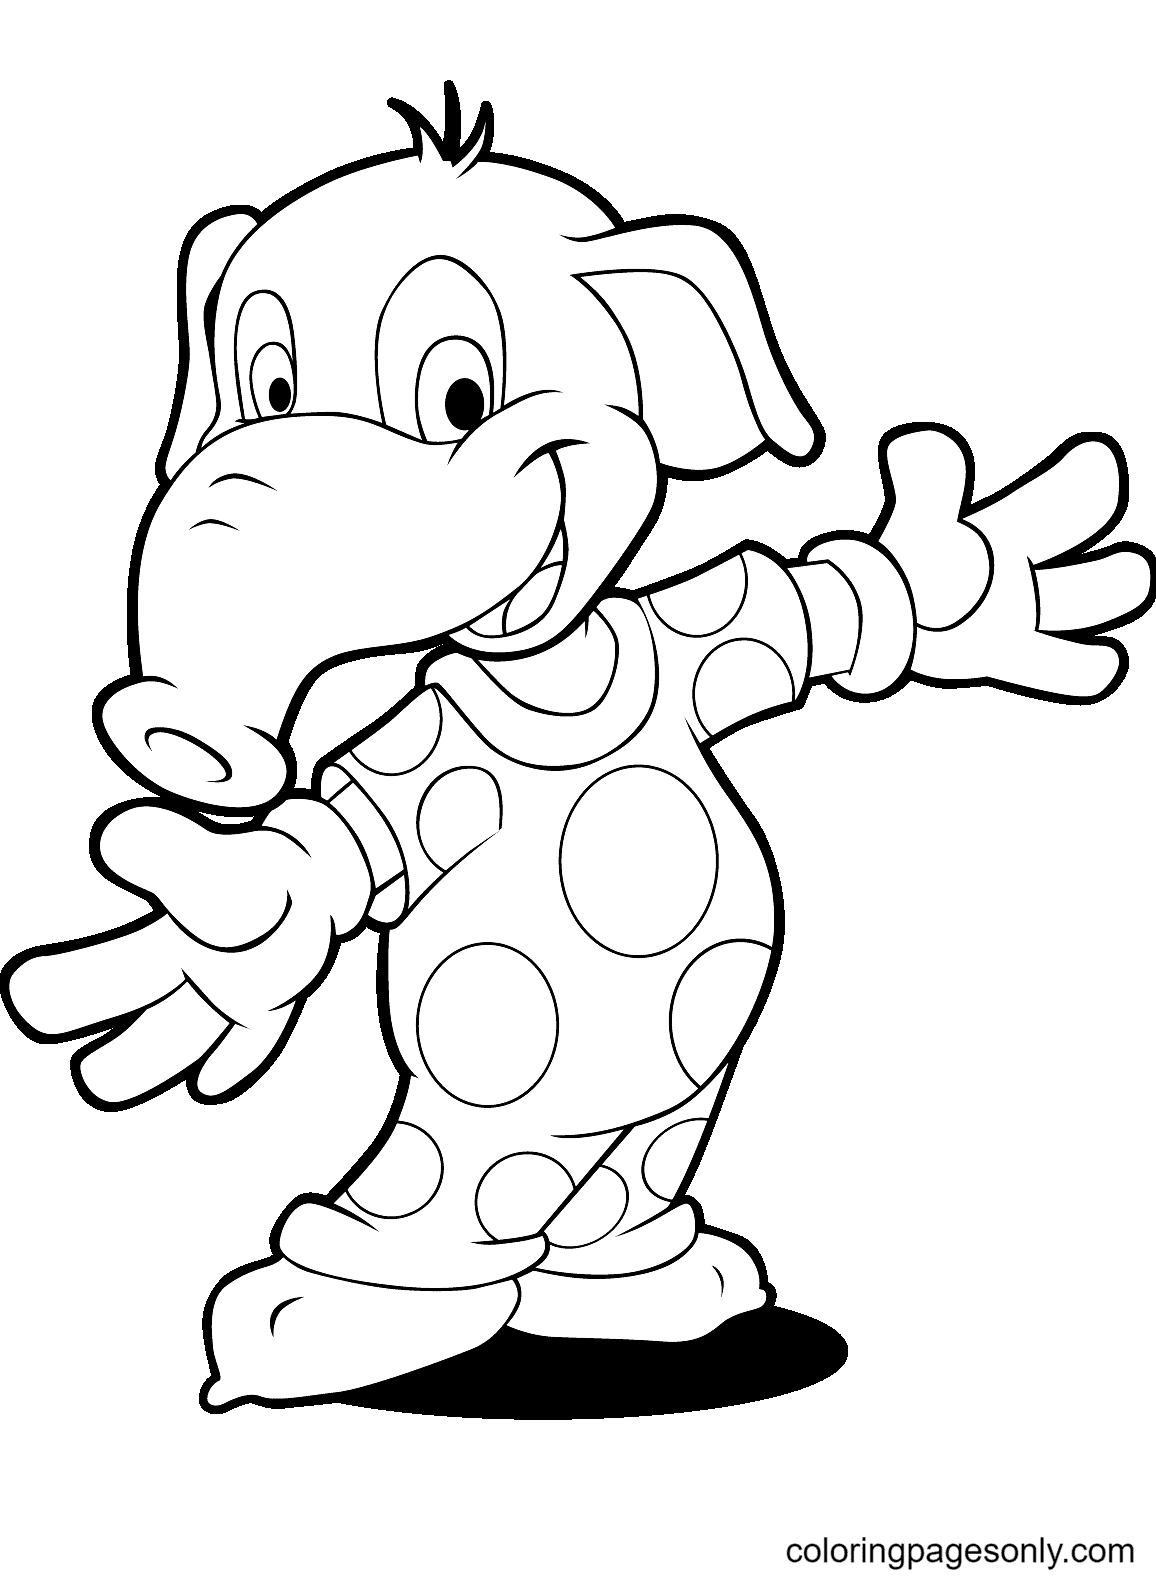 Adorable Cartoon Elephant Coloring Pages